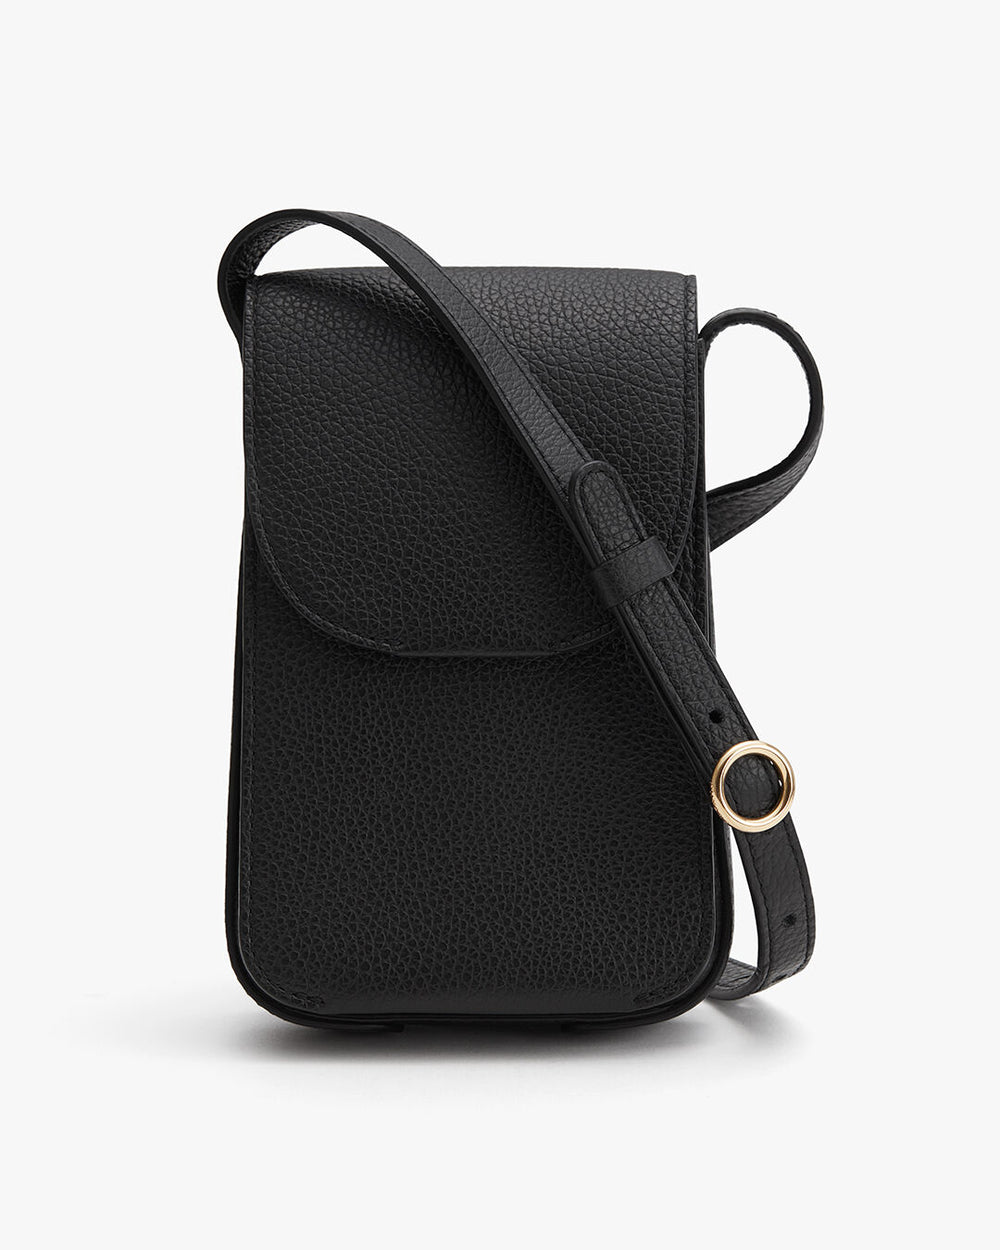 Small textured shoulder bag with a flap and circular metallic detail.